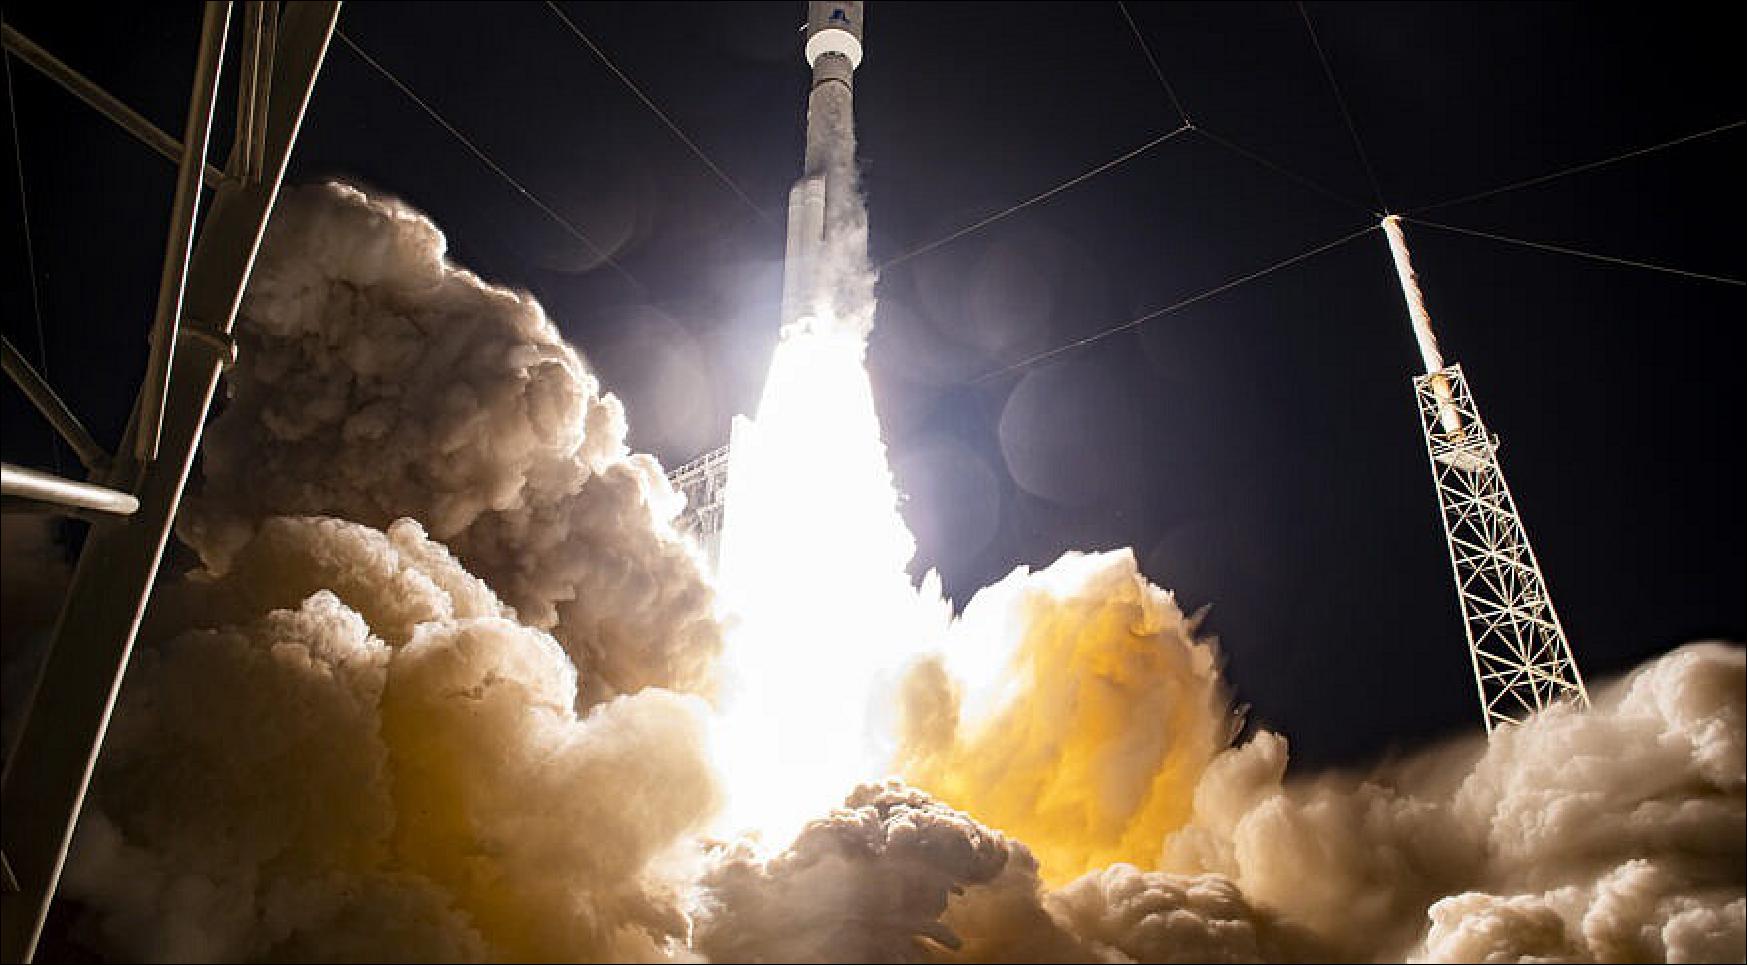 Figure 11: A United Launch Alliance Atlas V 551 rocket launched the Space Test Program-3 (STP-3) mission for the U.S. Space Force 7 December 2021, at 5:19 a.m. EST (image credit: ULA webcast)